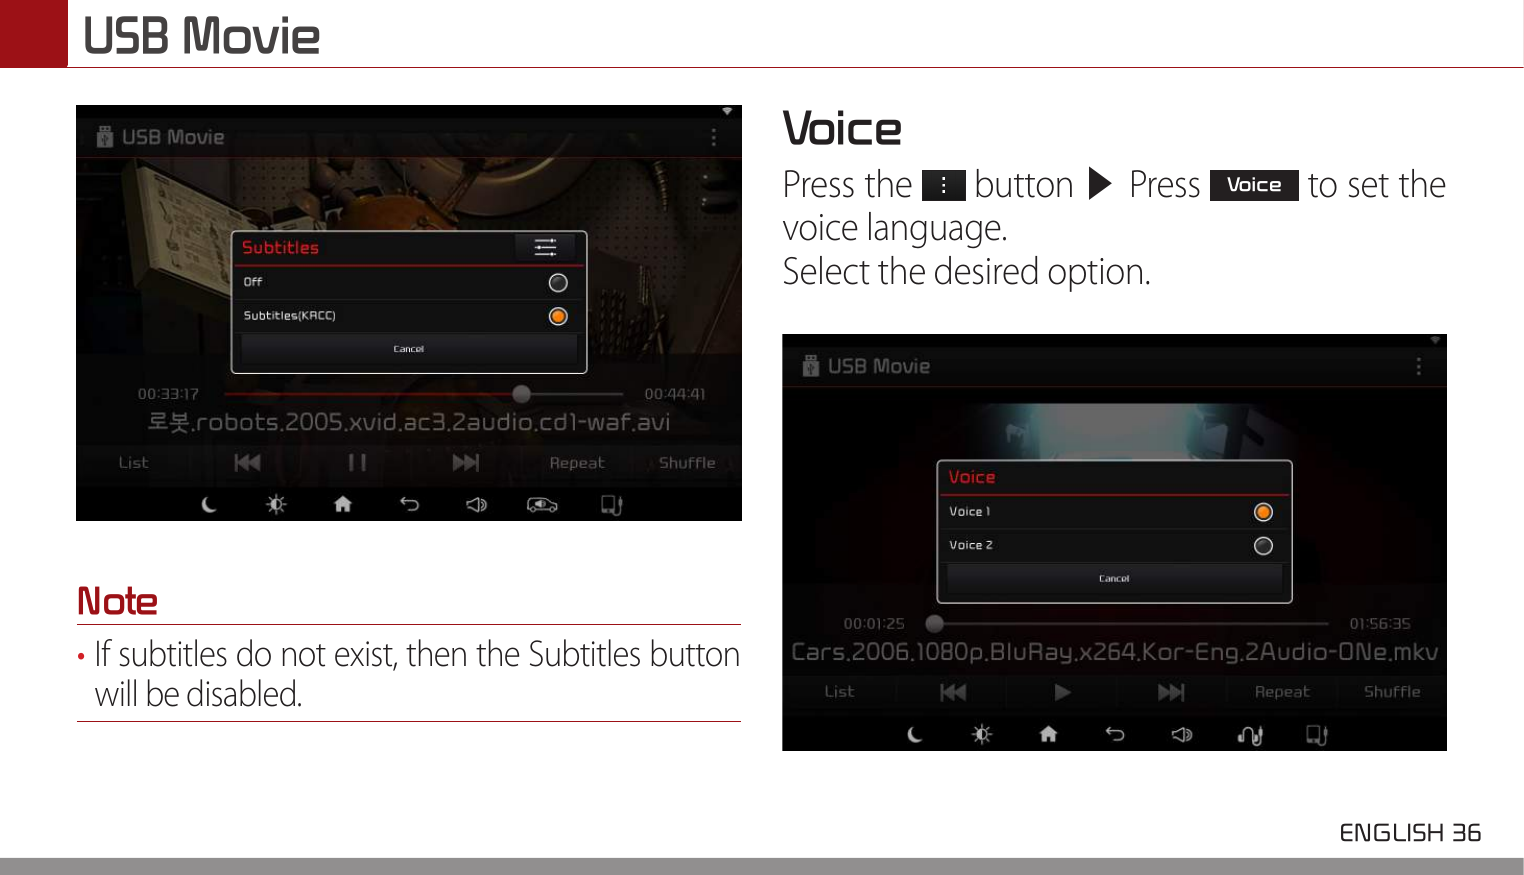 USB Movie ENGLISH 36 Note• If subtitles do not exist, then the Subtitles button will be disabled.VoicePress the   button ▶ Press Voice to set the voice language.Select the desired option.